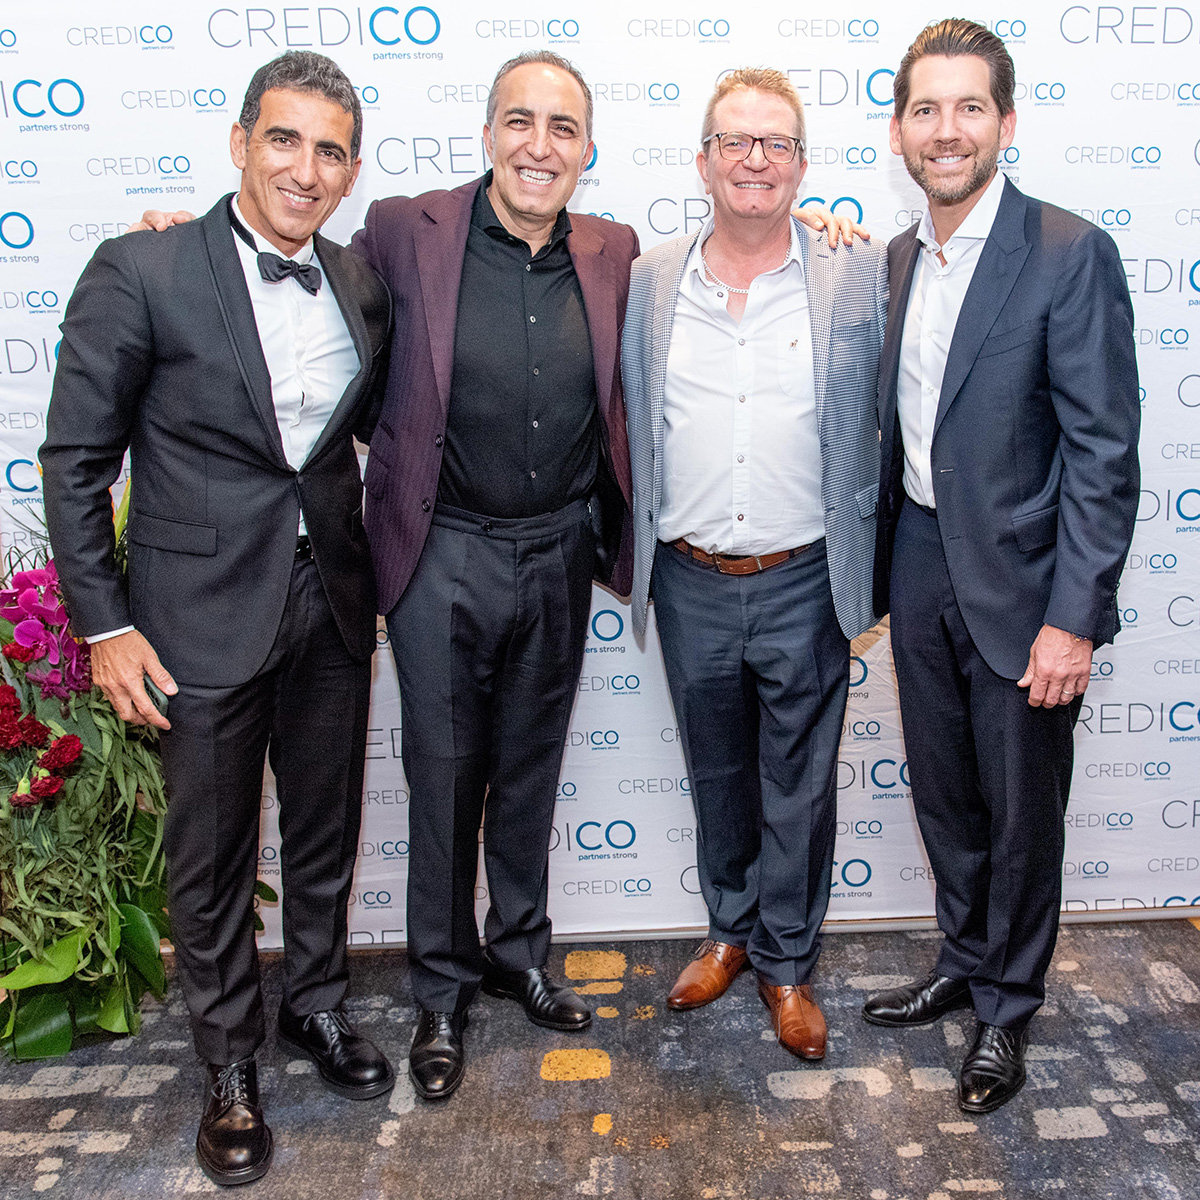 Four leaders, including Antoine Nohra, Peter van den Berg, and Josh Cote, pose for a smiling group photo in front of a Credico-branded backdrop at Credico South Africa's 2023 Awards Gala at Sun City Resort.